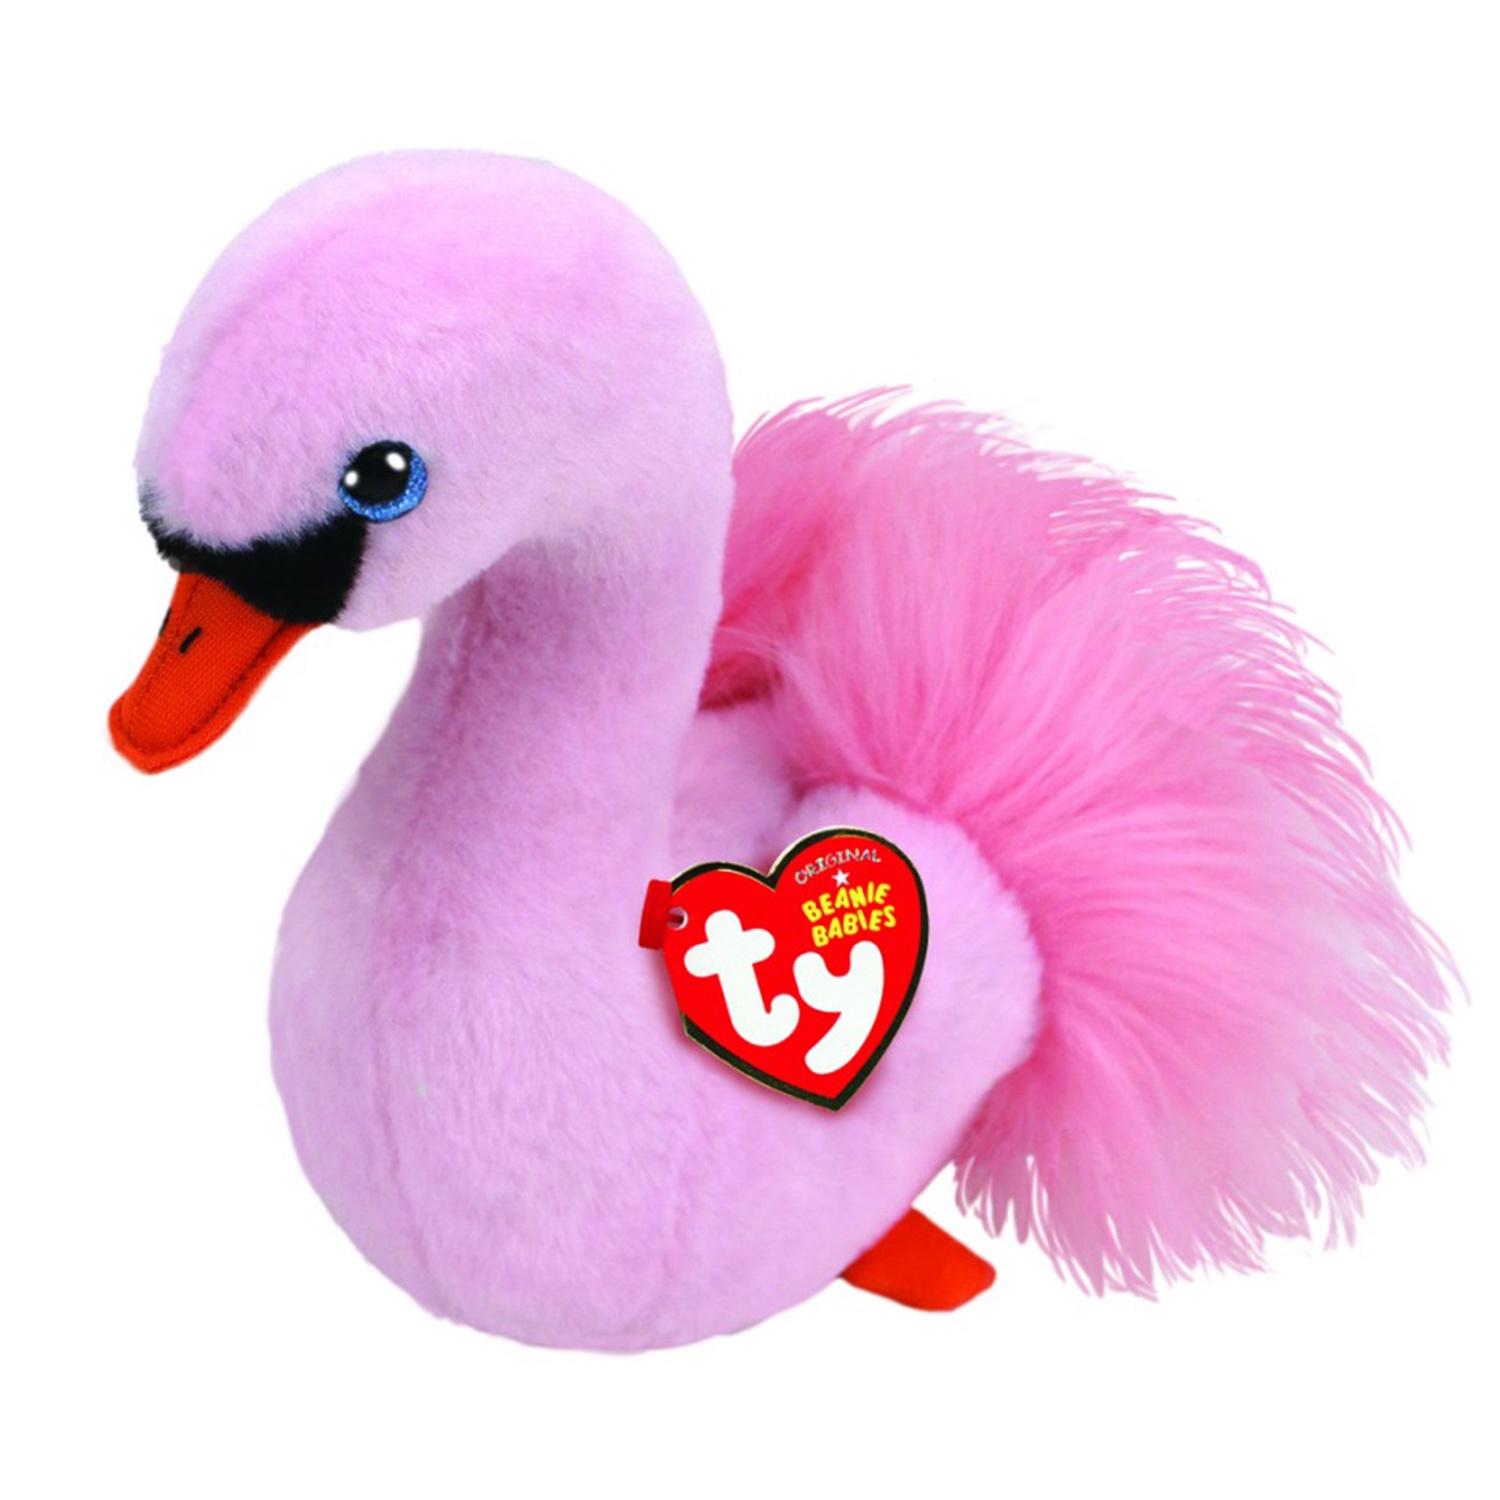 Ty Beanie Babies Pinky the Flamingo Plush Toy for sale online 